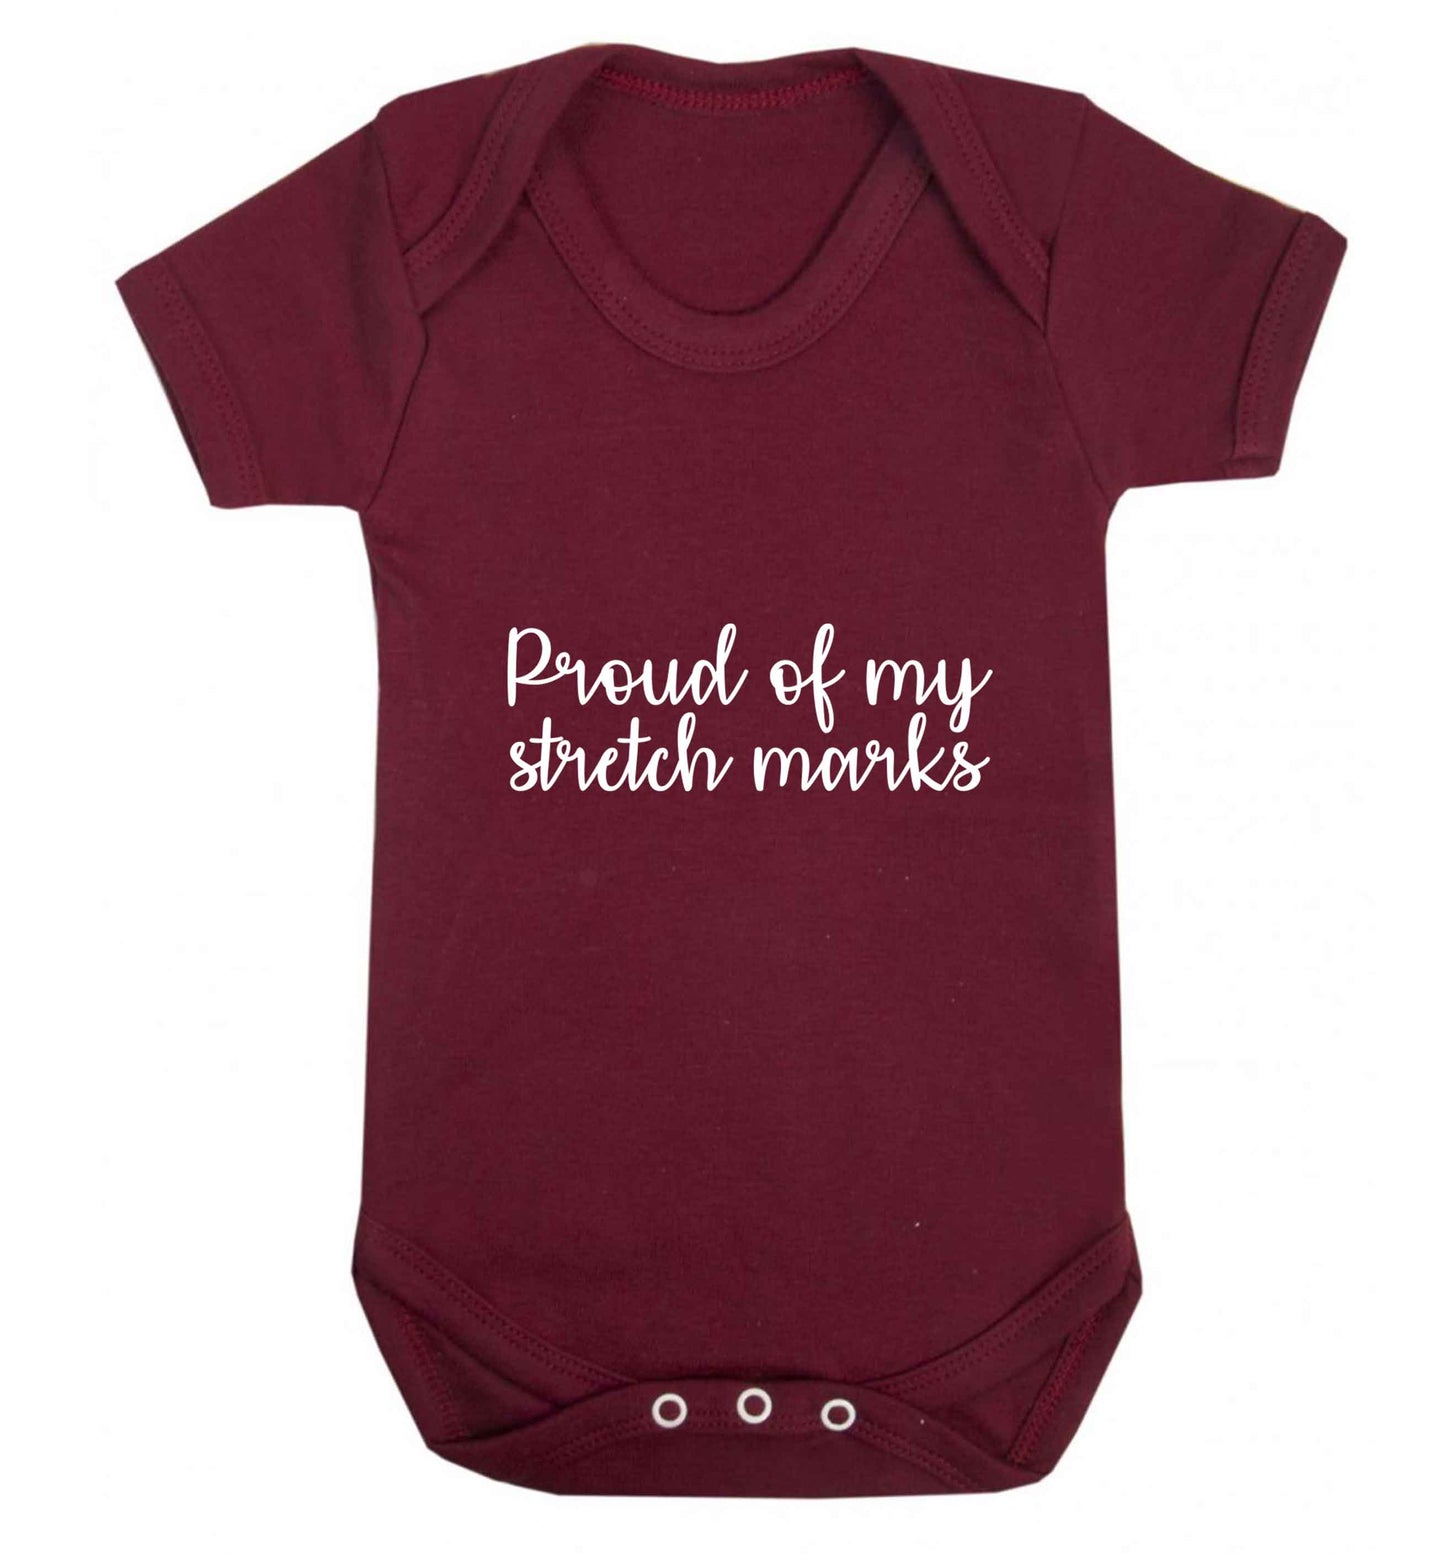 Proud of my stretch marks baby vest maroon 18-24 months